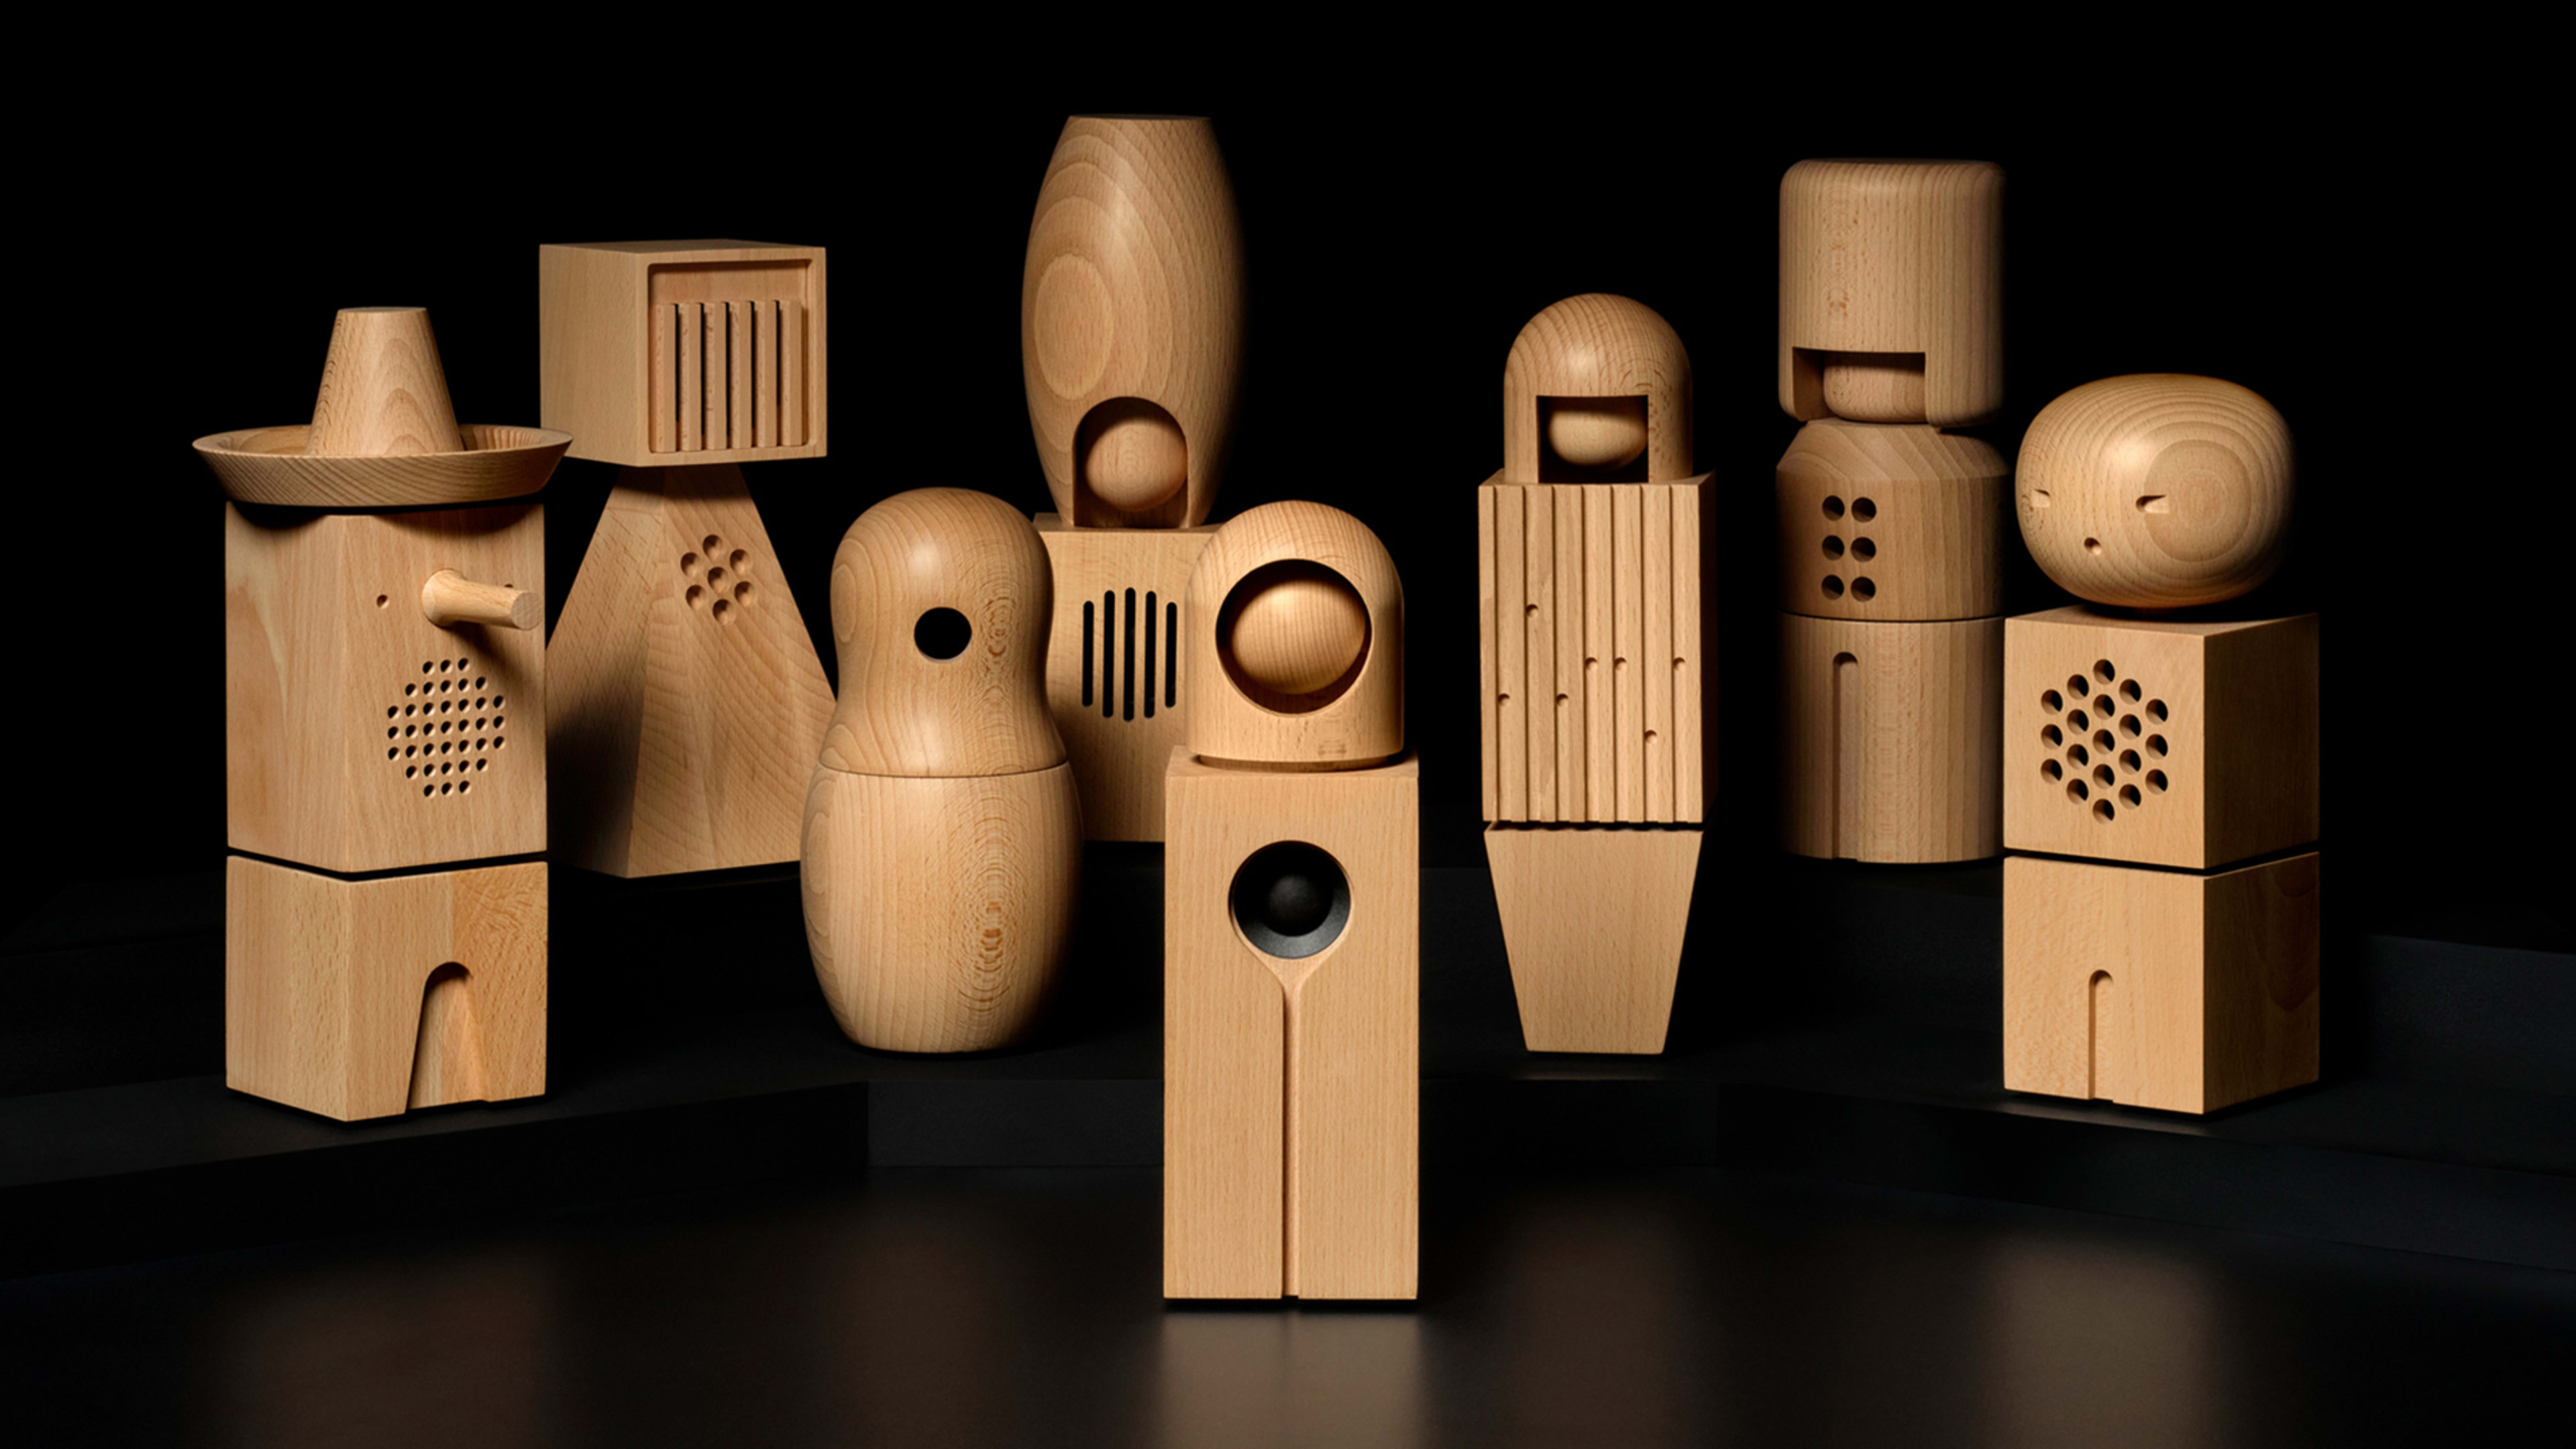 These little wooden dolls might actually have souls